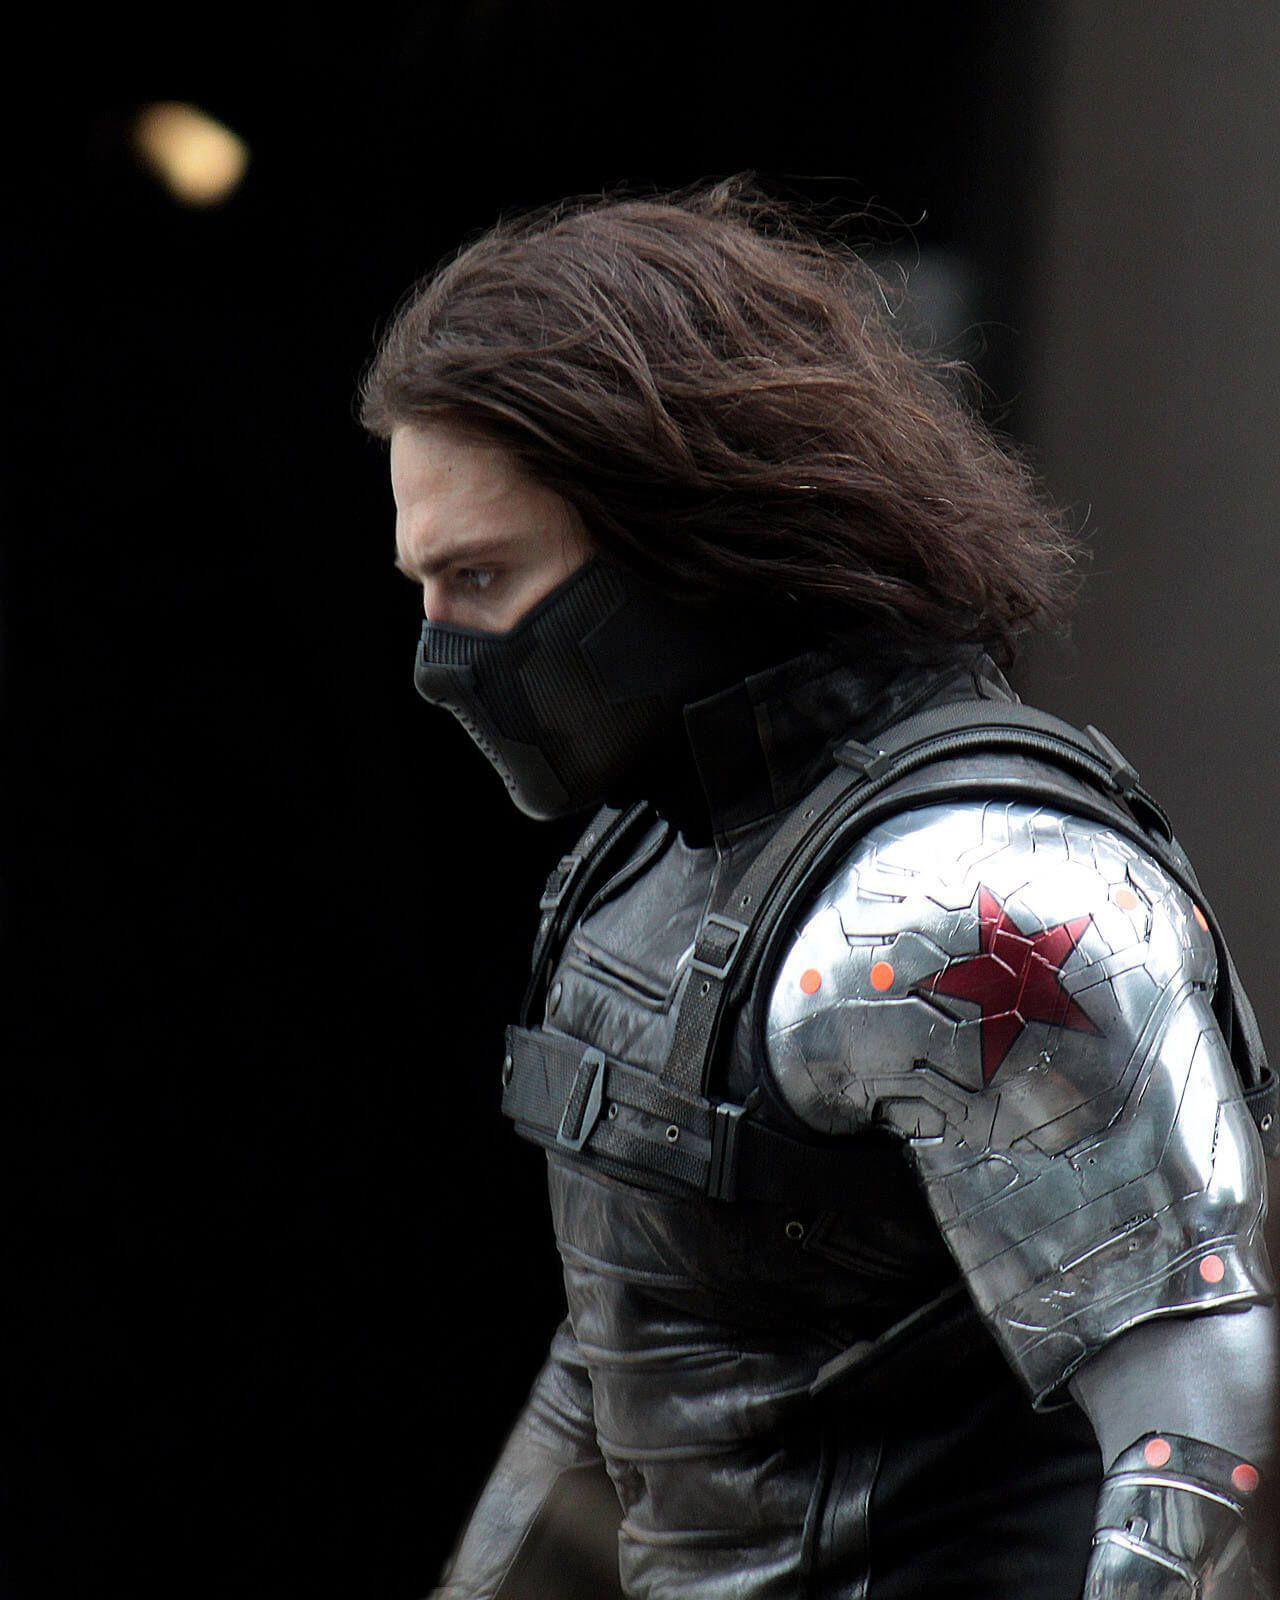 Winter Soldier Wallpapers Wallpaper Cave